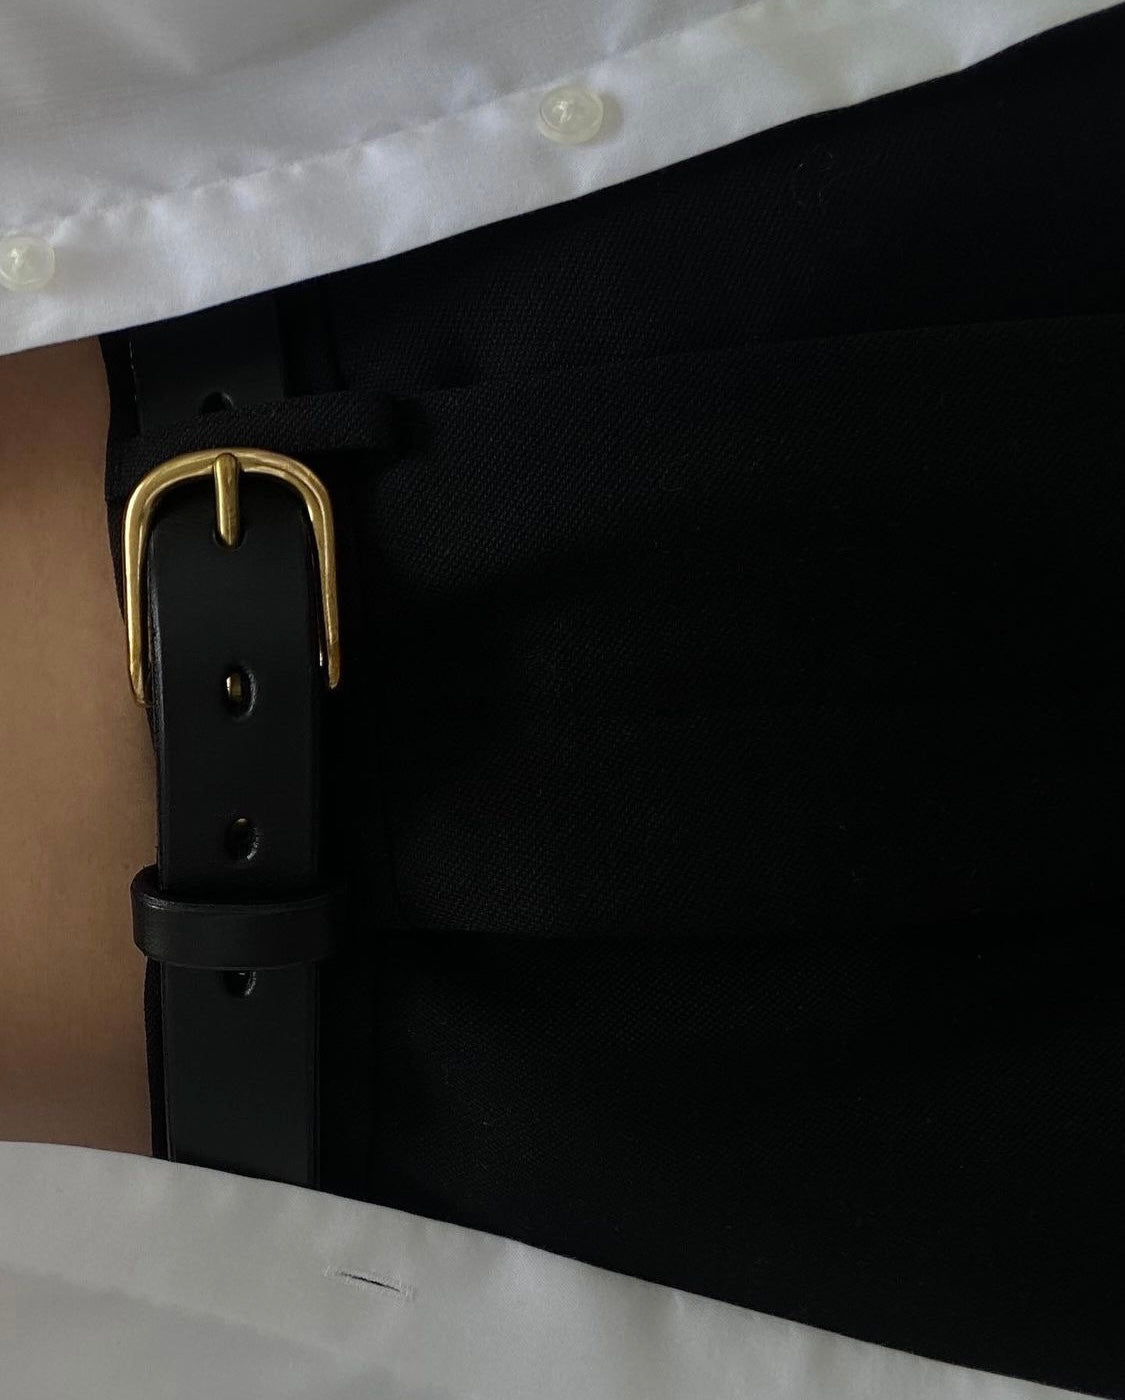 SAINT classic leather belt in black leather with solid brass buckle. made in Australia using traditional leather smith techniques. 100% Italian leather. worn by Emily Bonita